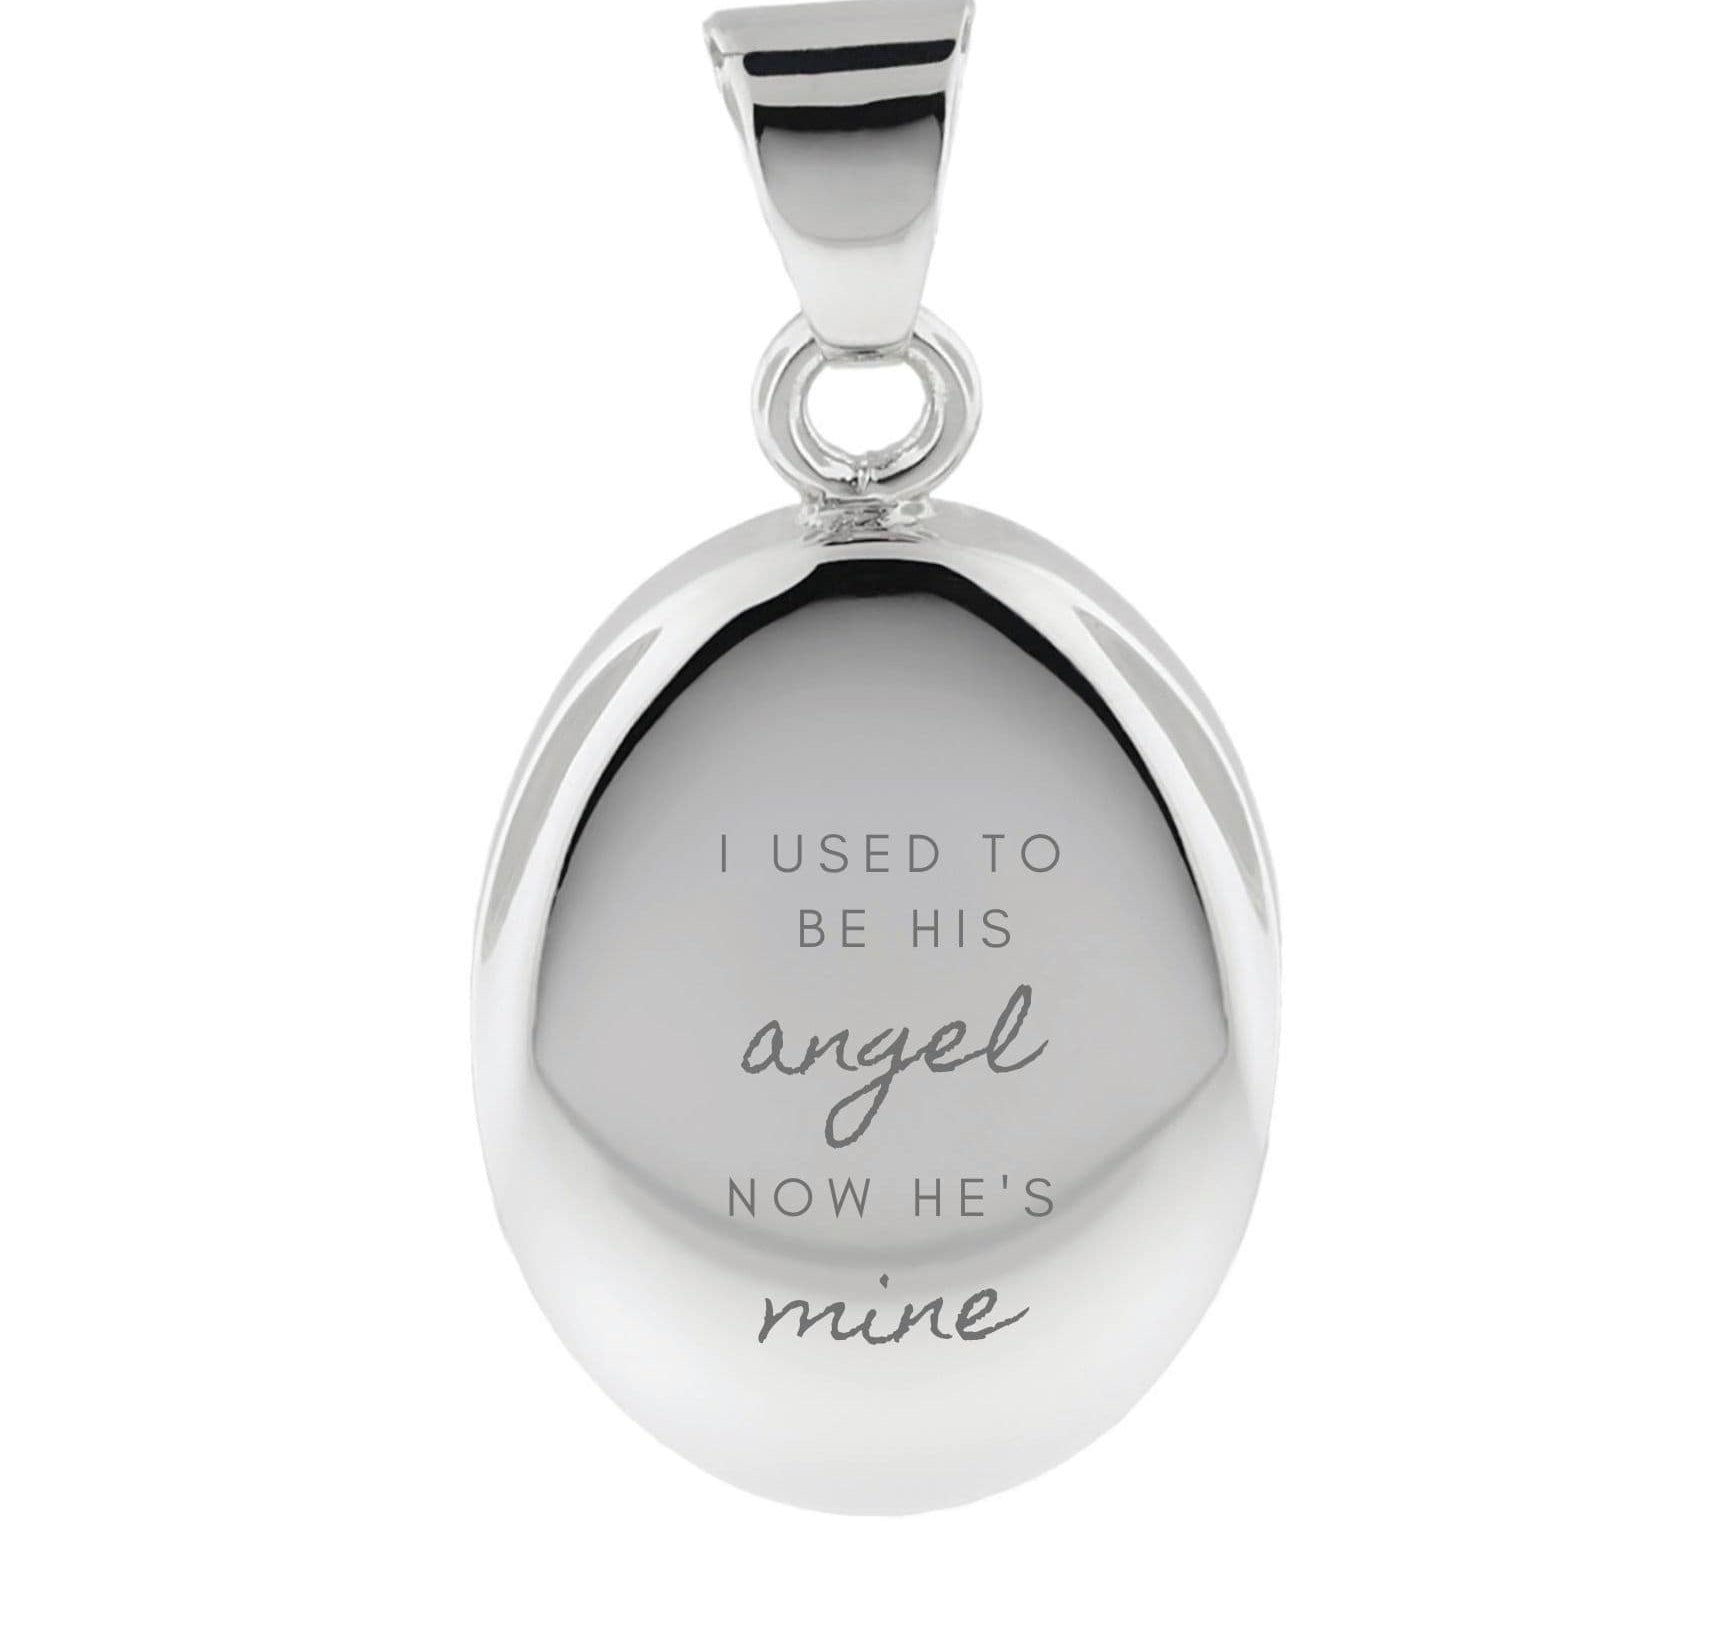 Cara Keepsakes Silver Pendant Urns 'I Used To Be His Angel' Pendant Urn